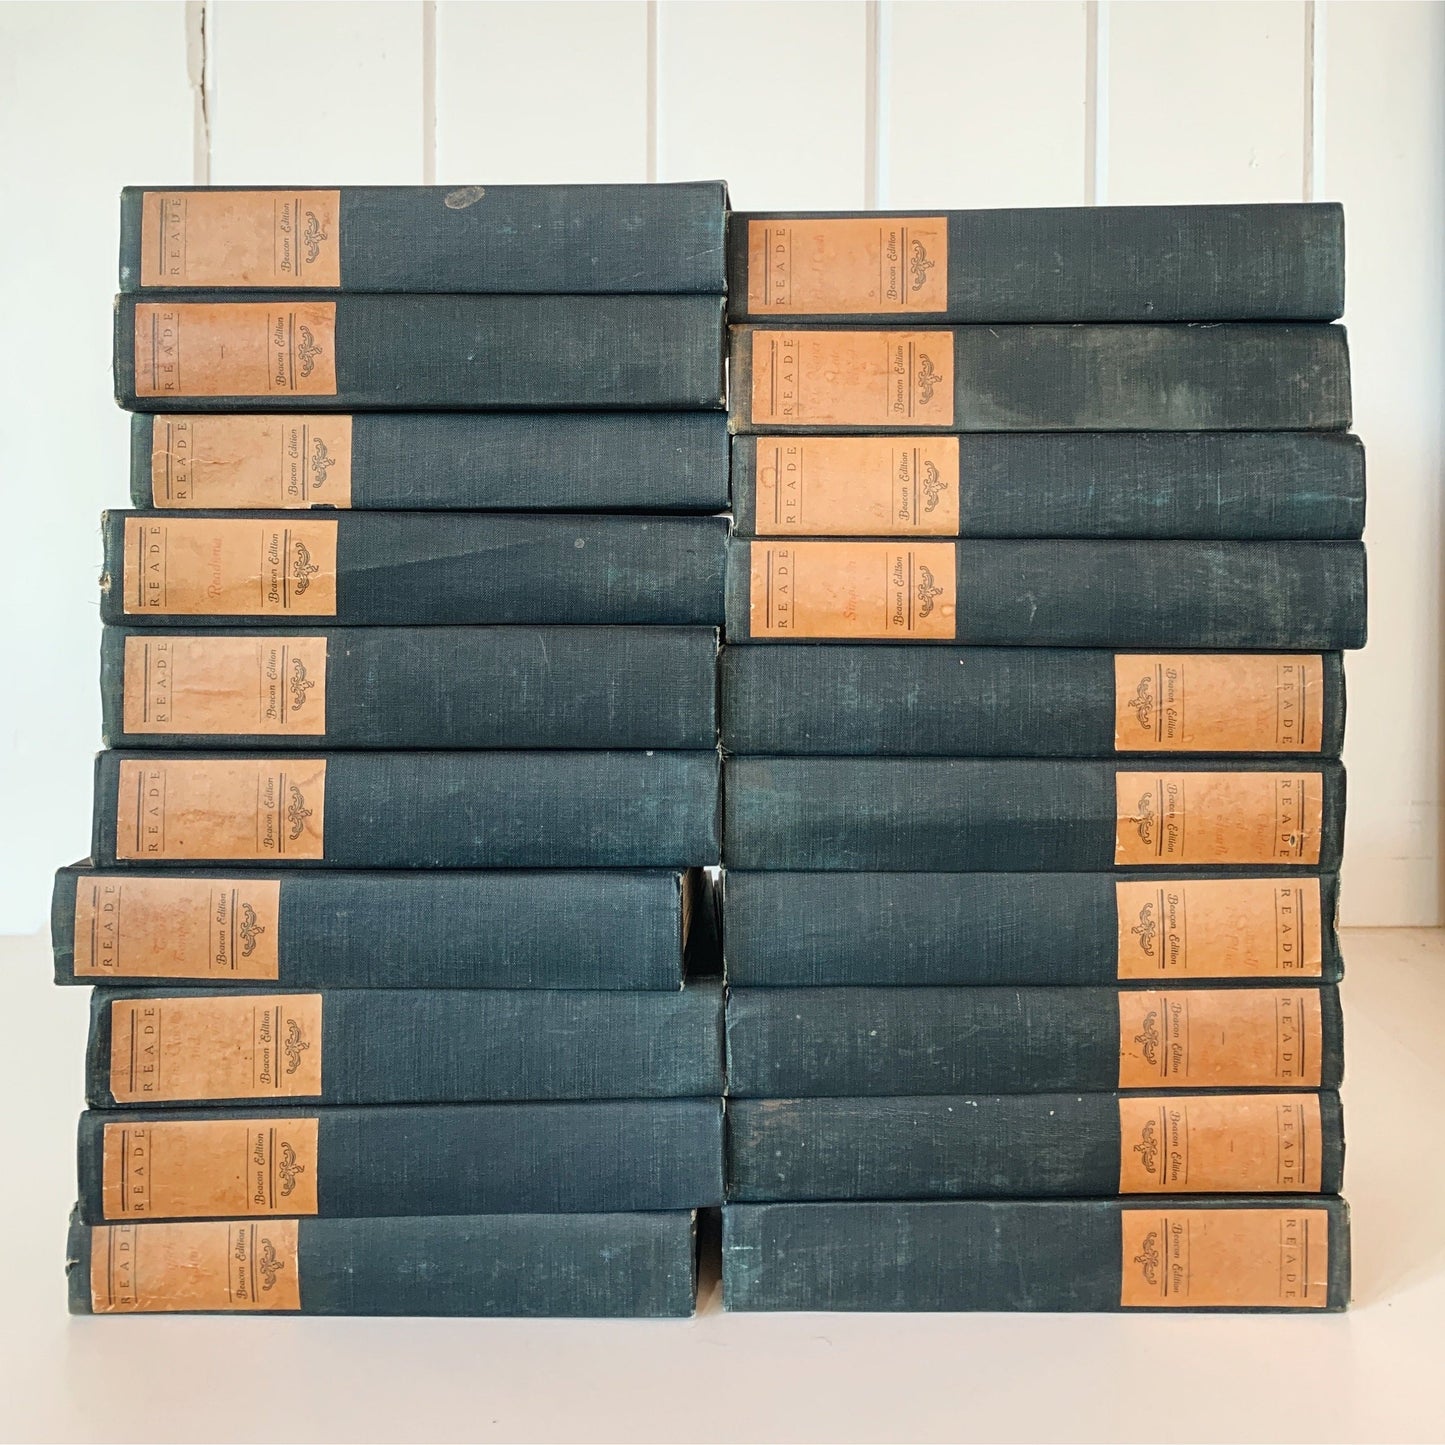 Antique Blue Book Set, Charles Reade, Large Dark Blue Complete Set of 20 Volumes, The Beacon Edition